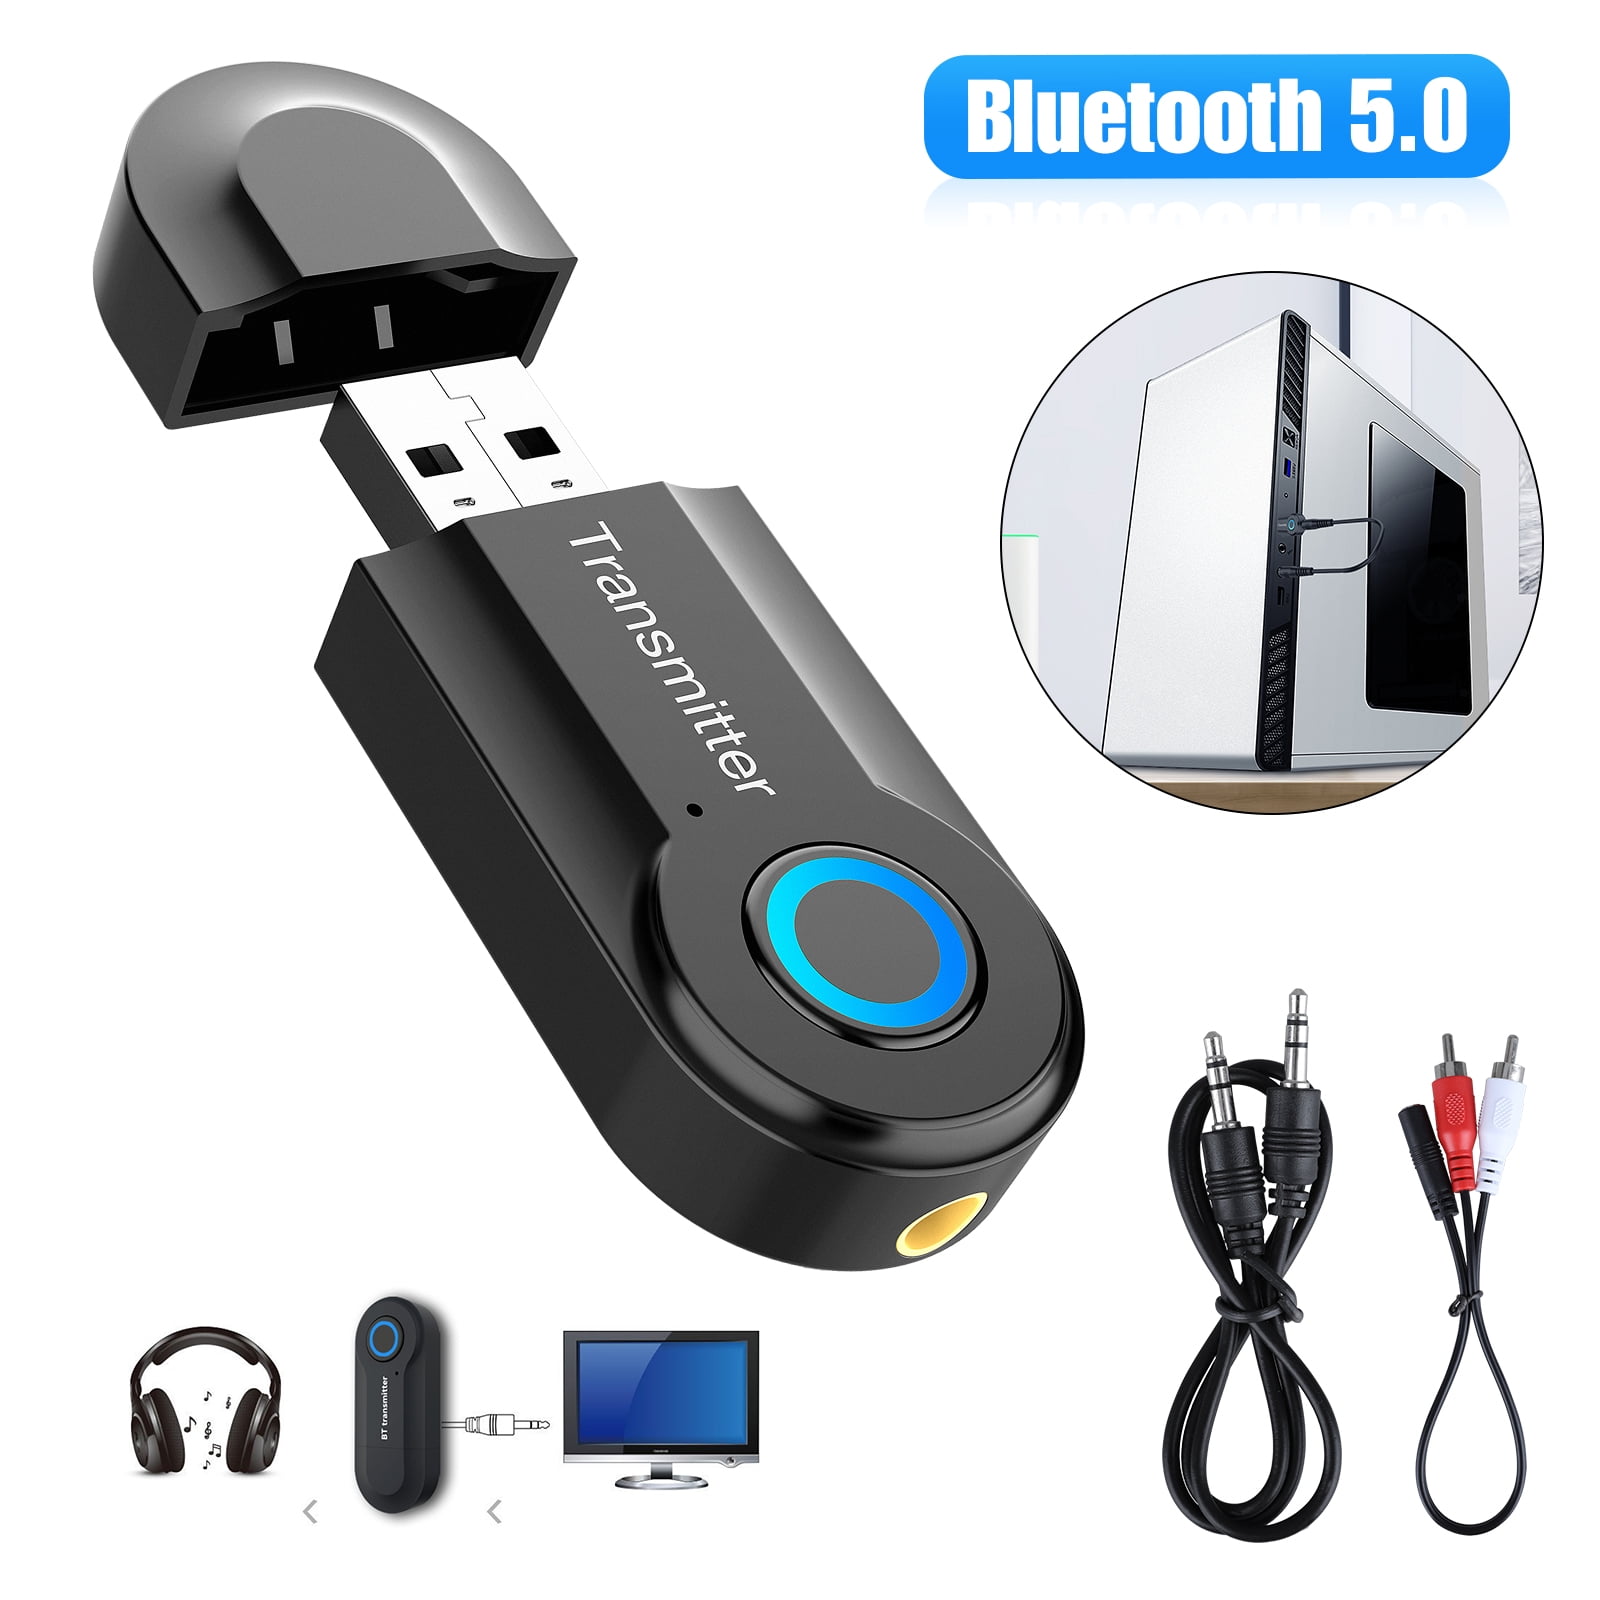 2 in 1 Bluetooth Wireless Transmitter Receiver 4.2 Adapter Audio Car Music TV FF 